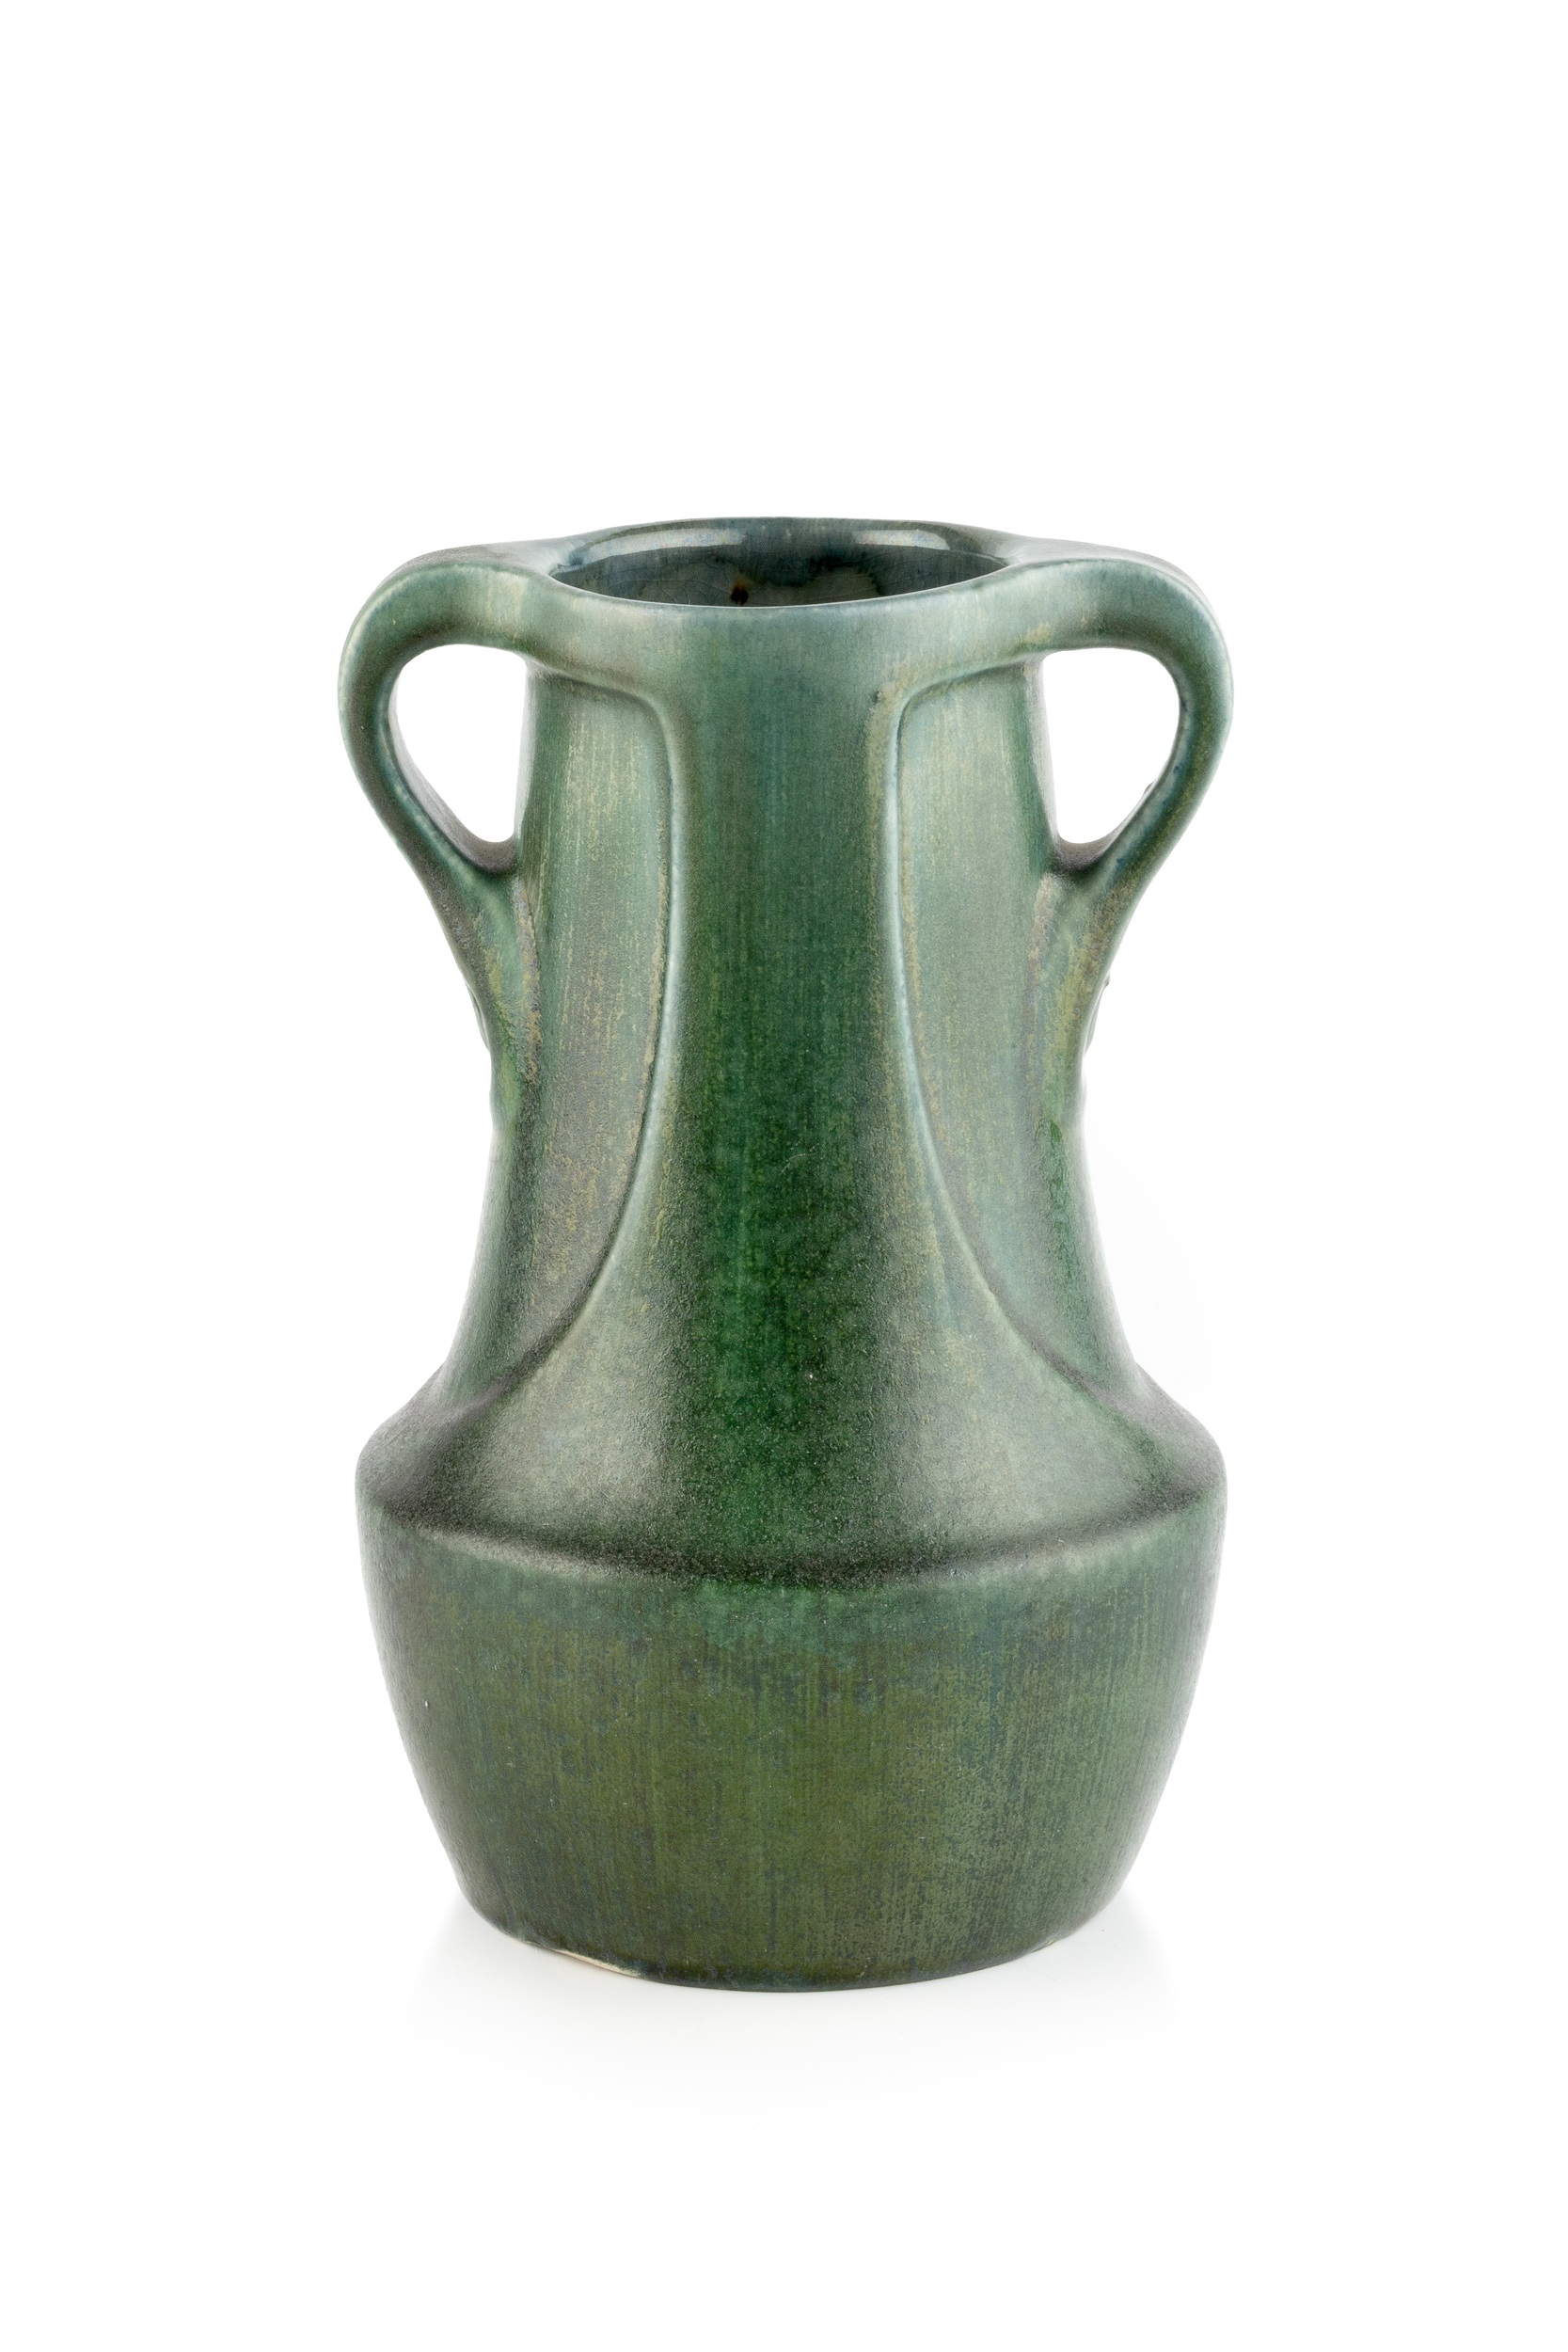 Klaas Mobach (1855-1928) Art pottery vase with twin-handles and green glaze 20cm high.